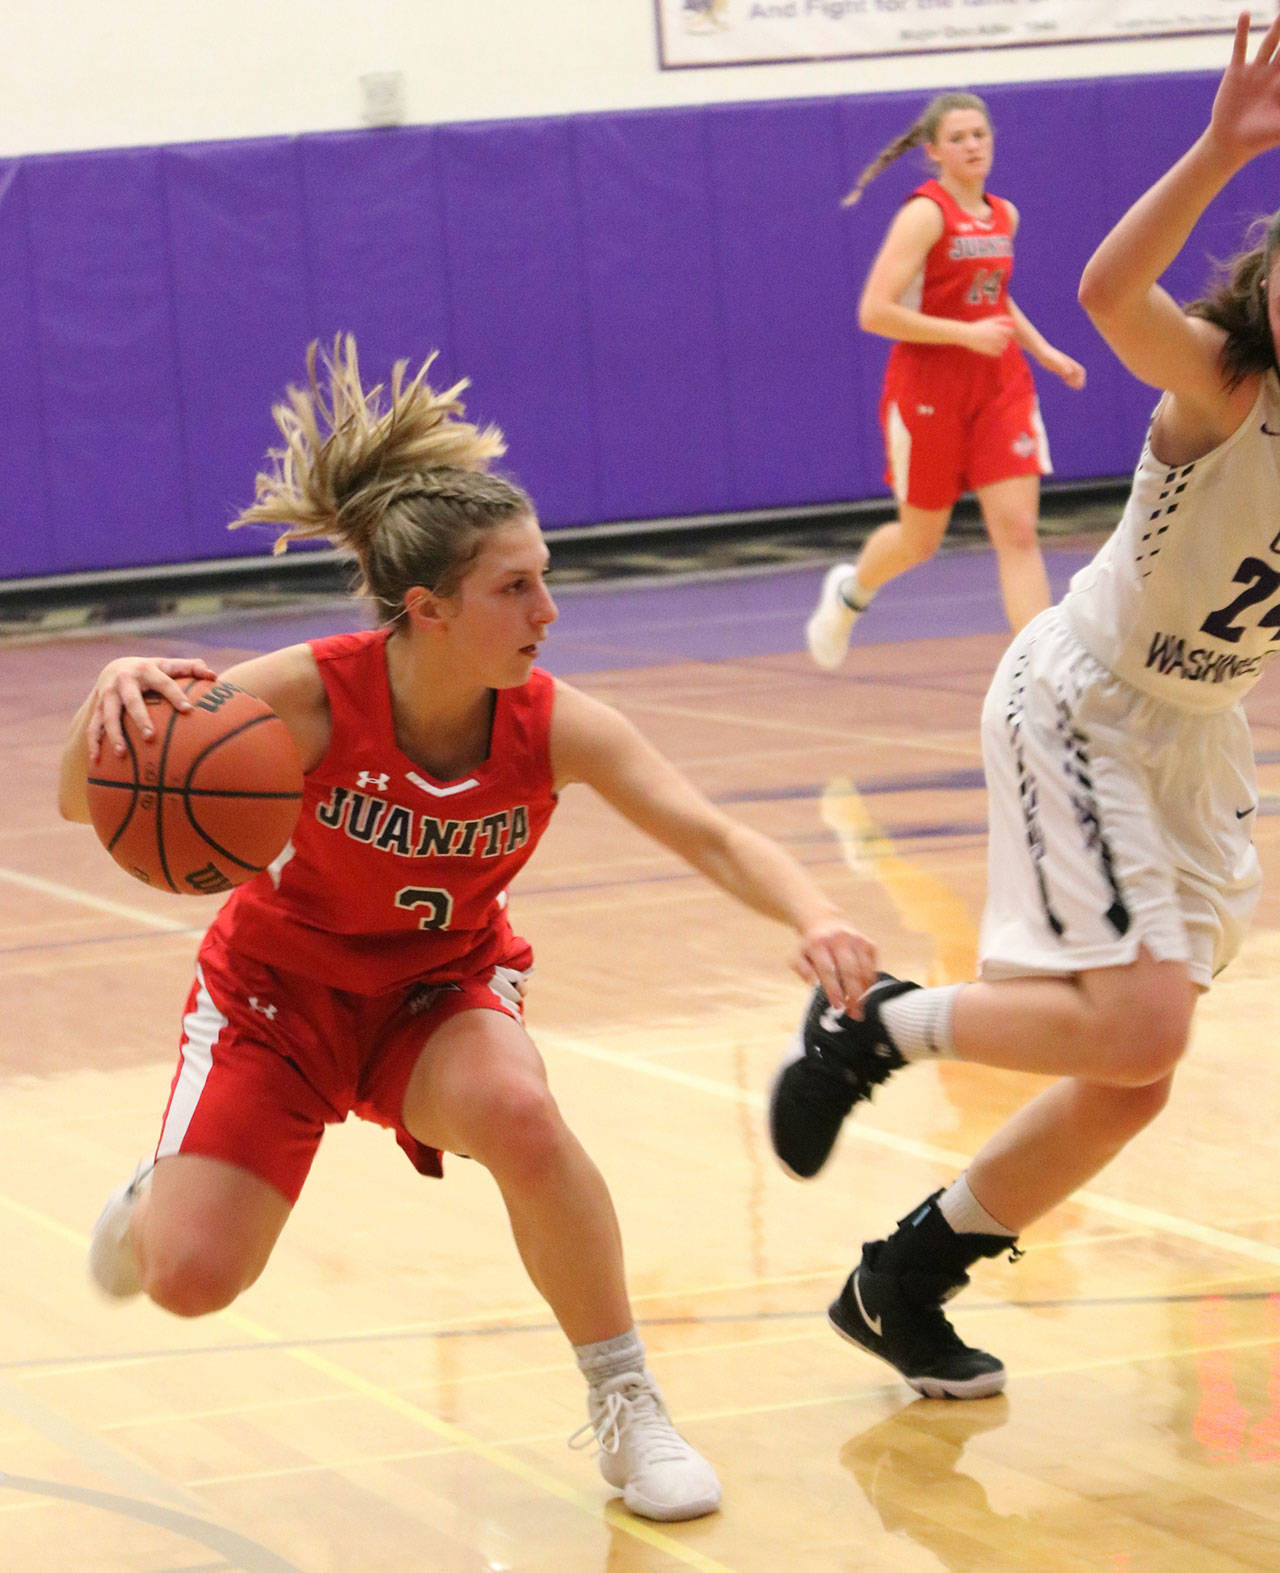 Juanita’s Kayla Huff gets the offense moving. Andy Nystrom / staff photo